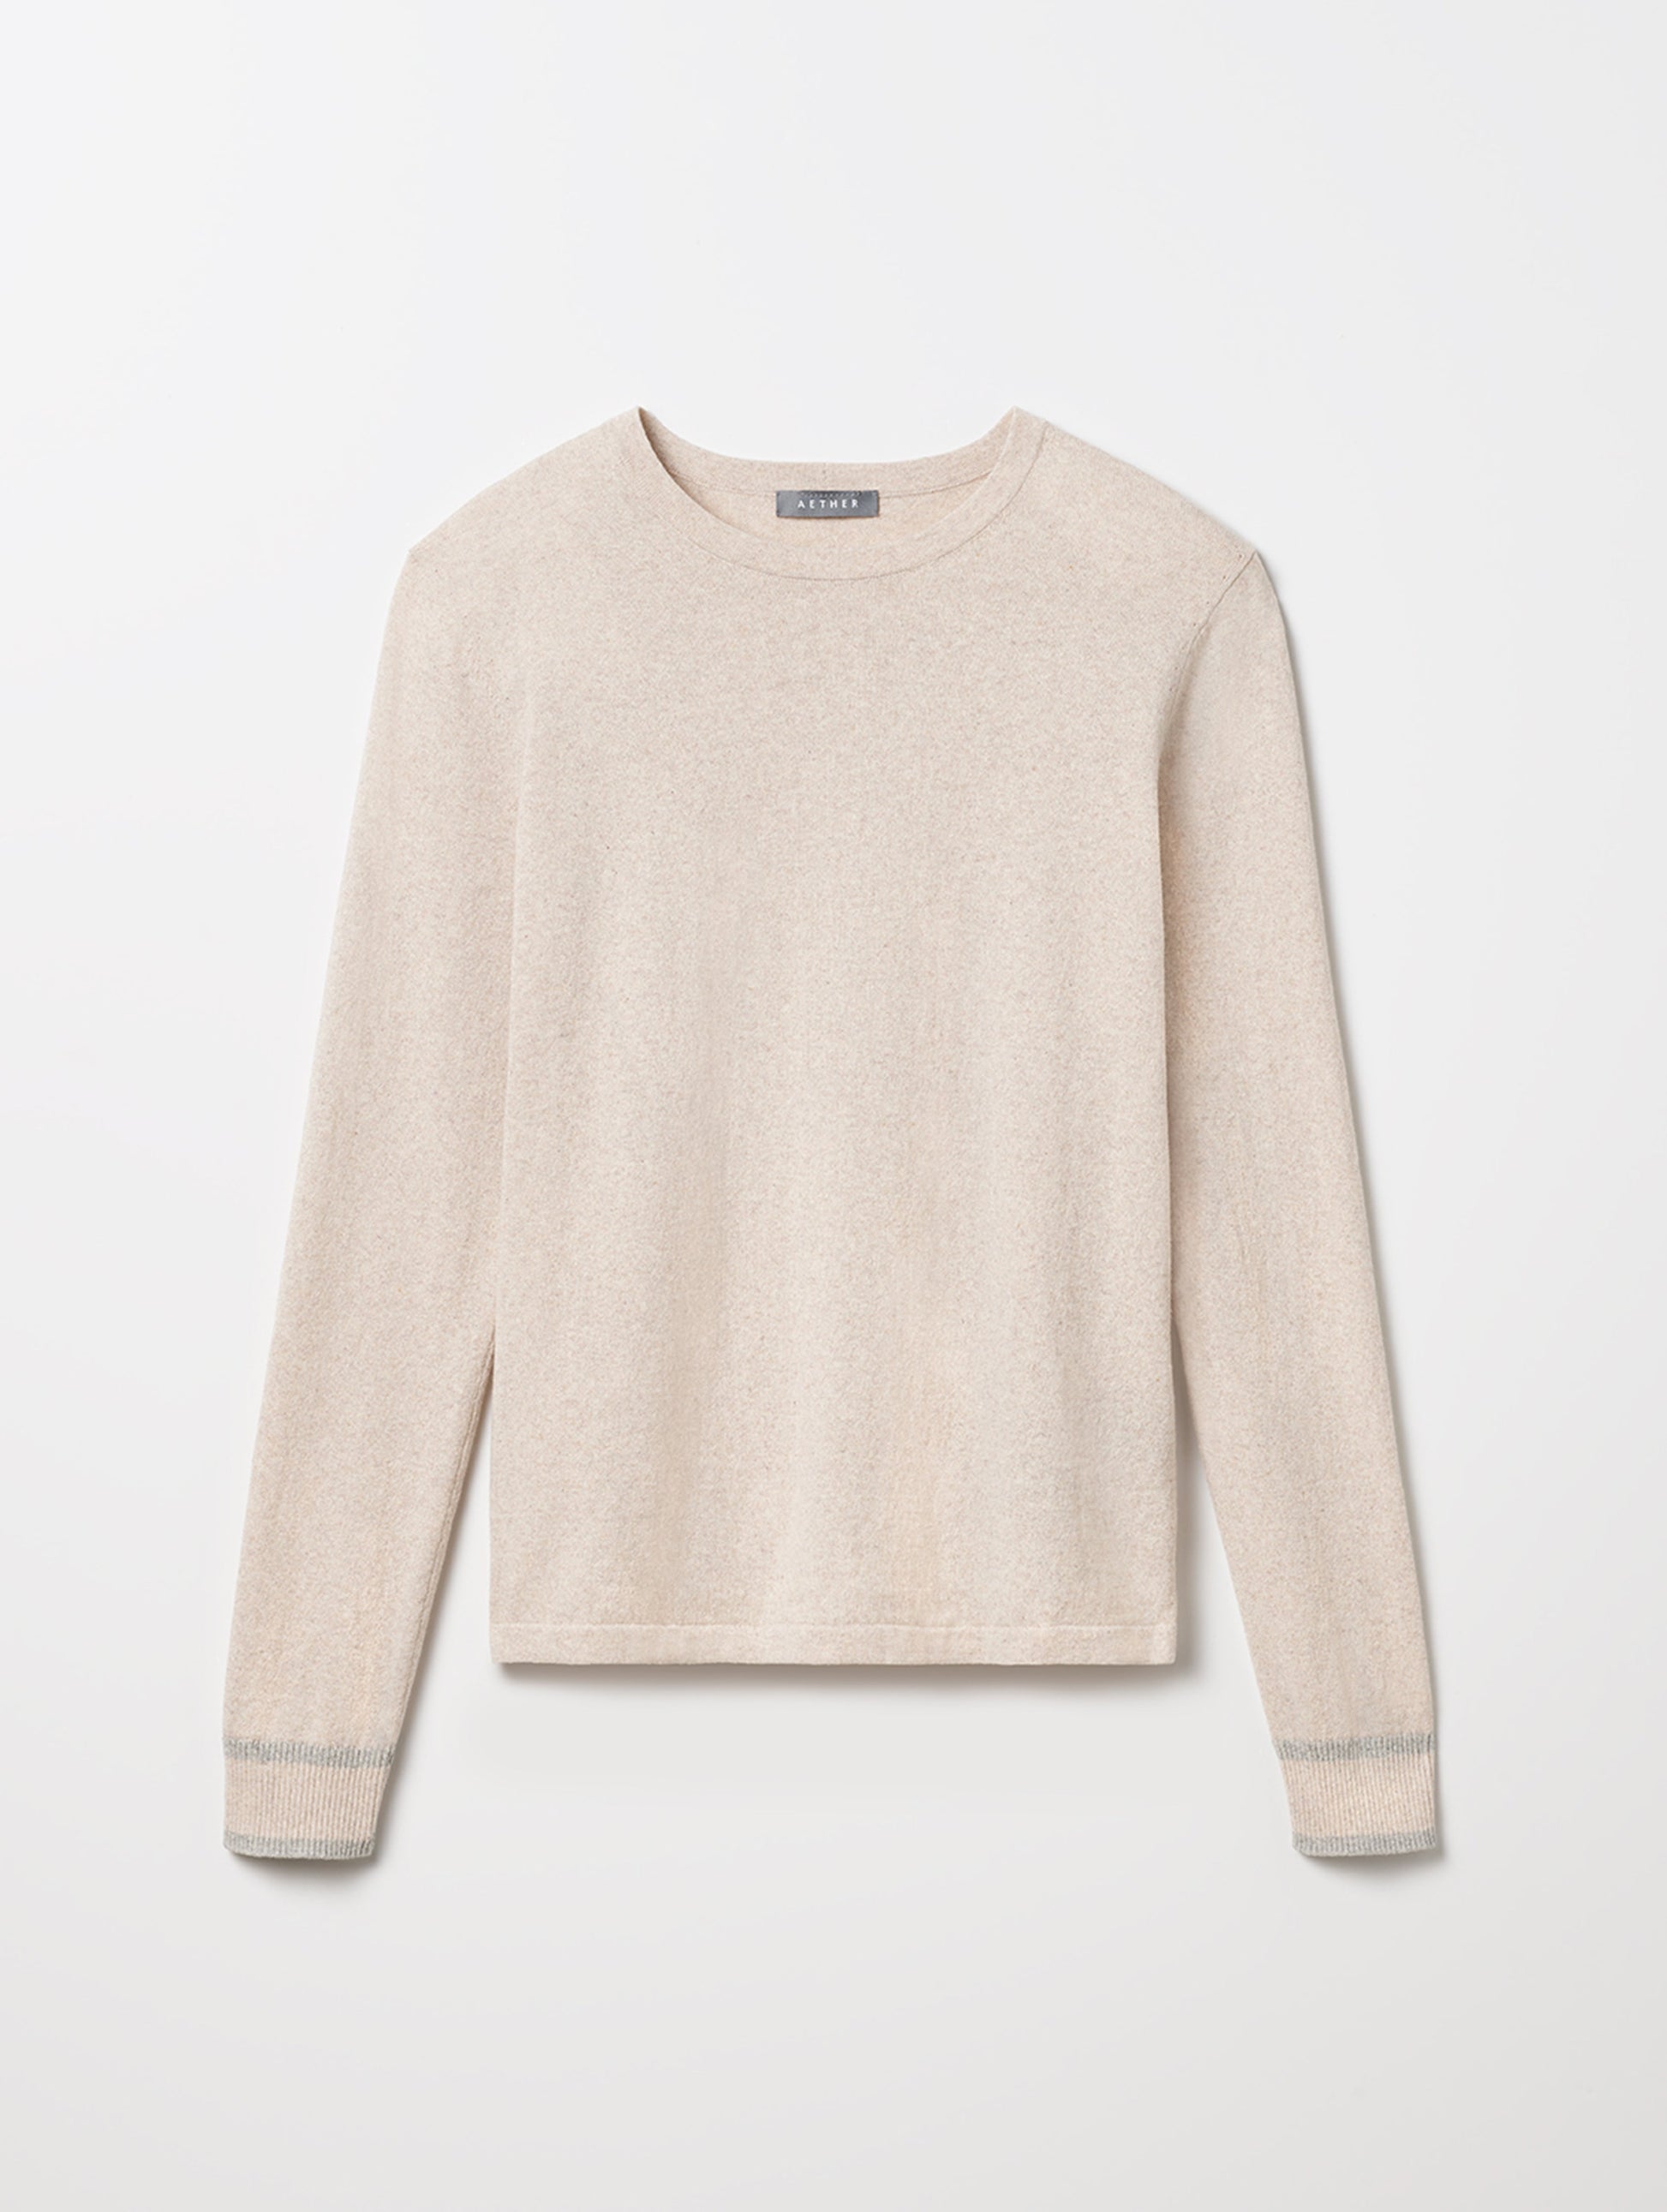 beige sweater for women from Aether Apparel